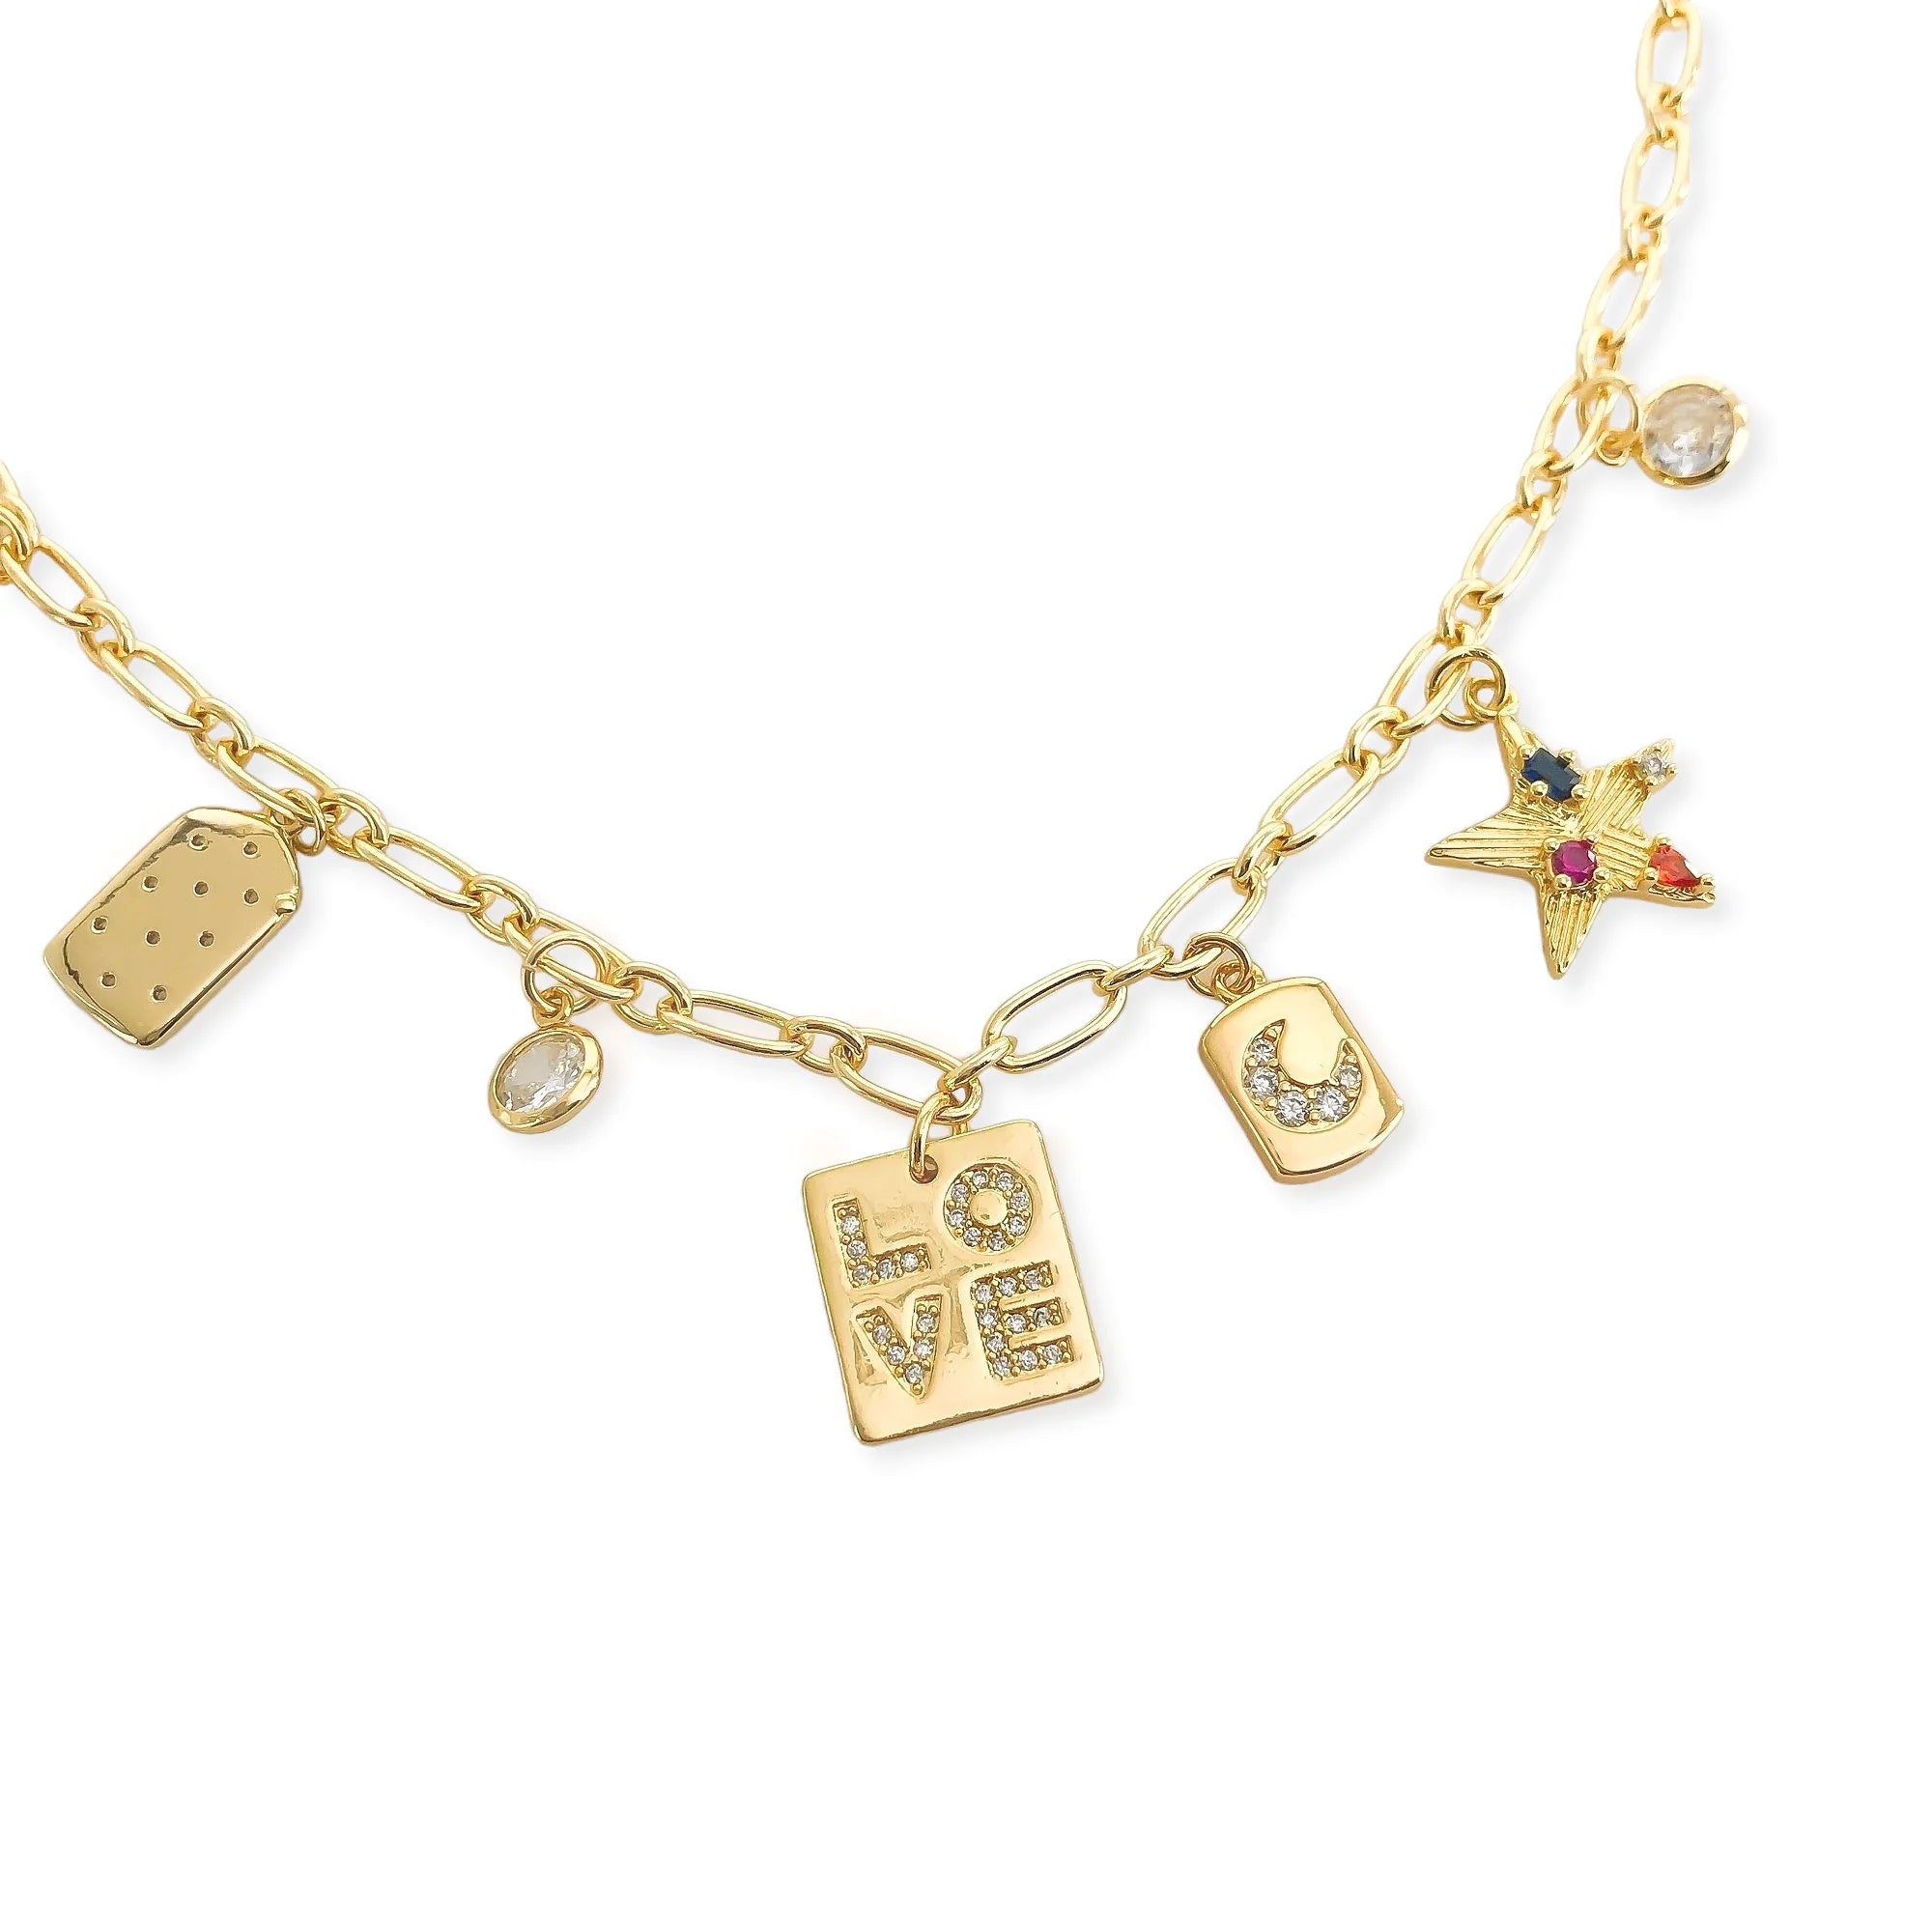 ANK507 - Charm Necklace